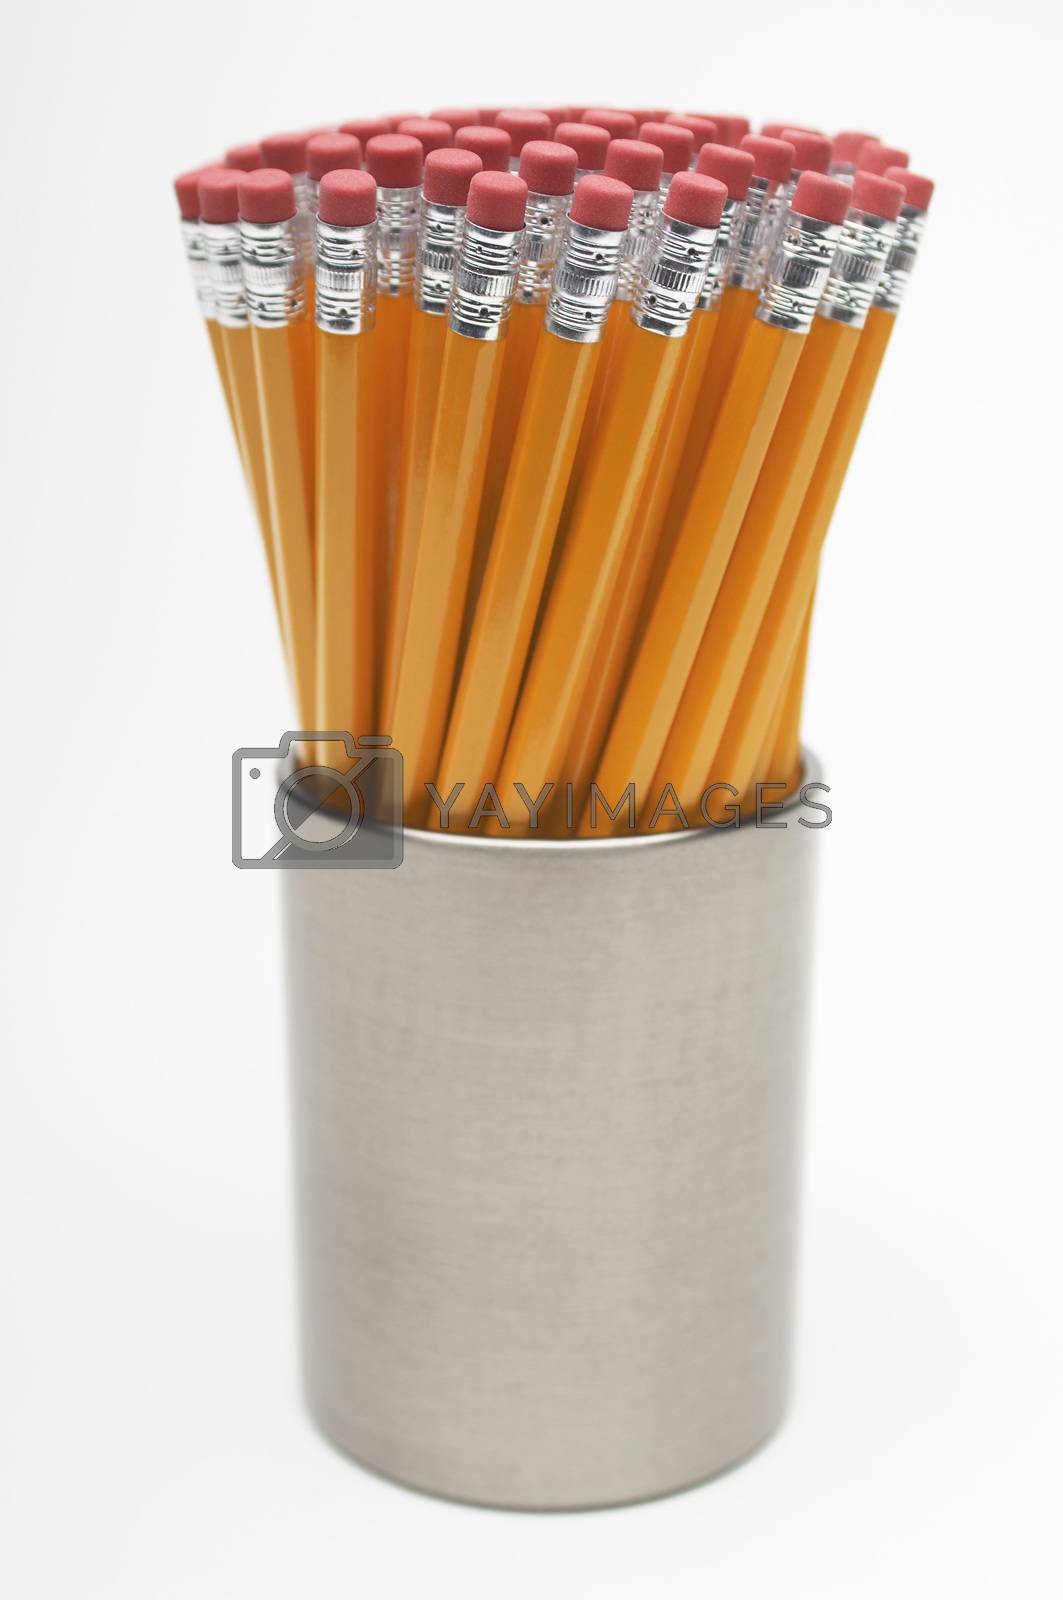 Royalty free image of New pencils in container isolated over white background by moodboard